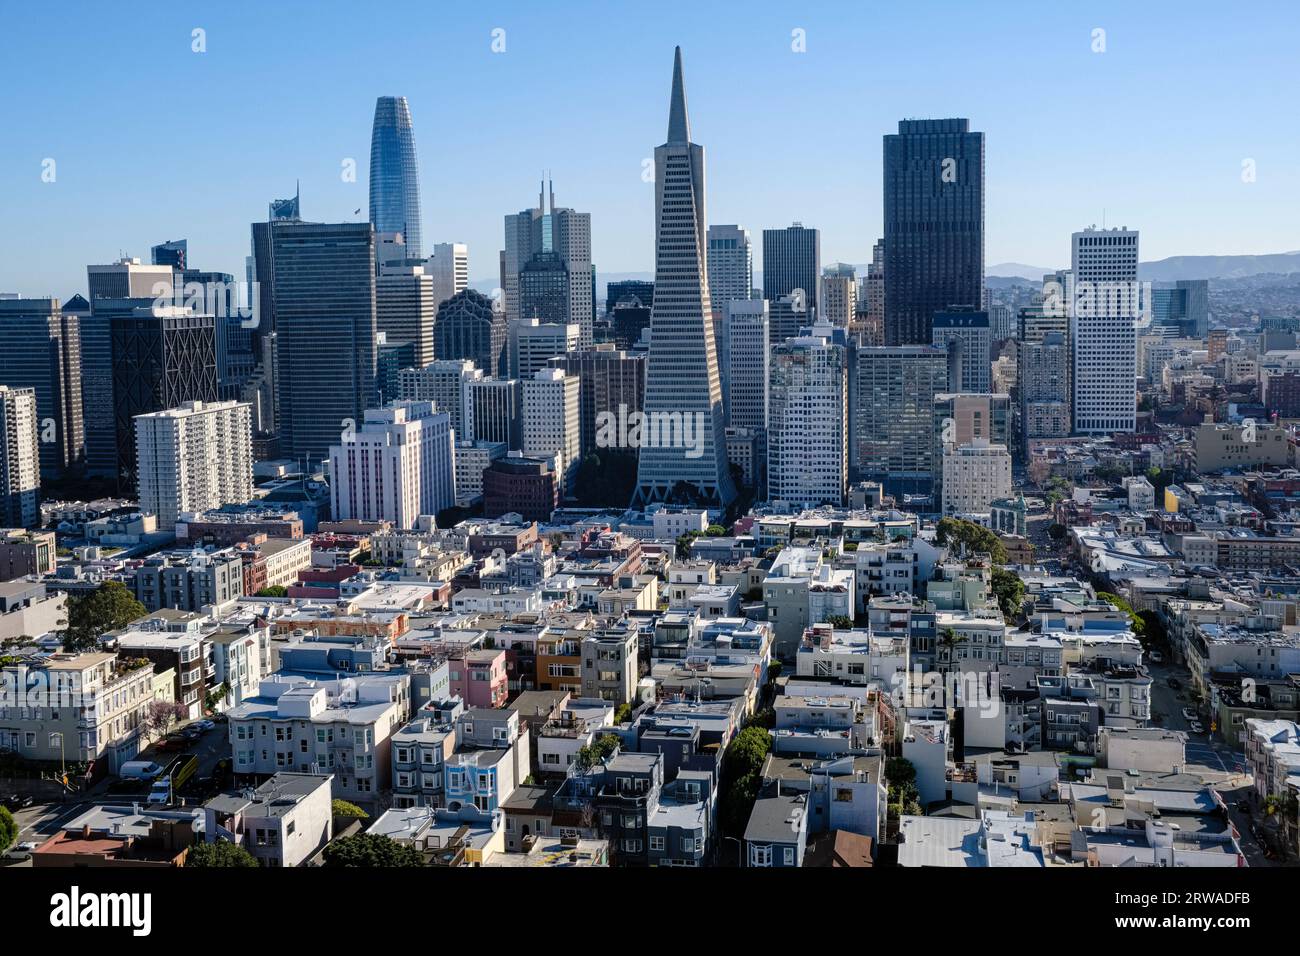 View towards the Transamerica Pyramid in downtown San Francisco from the Coit Tower on Telegraph Hill, California, USA Stock Photo